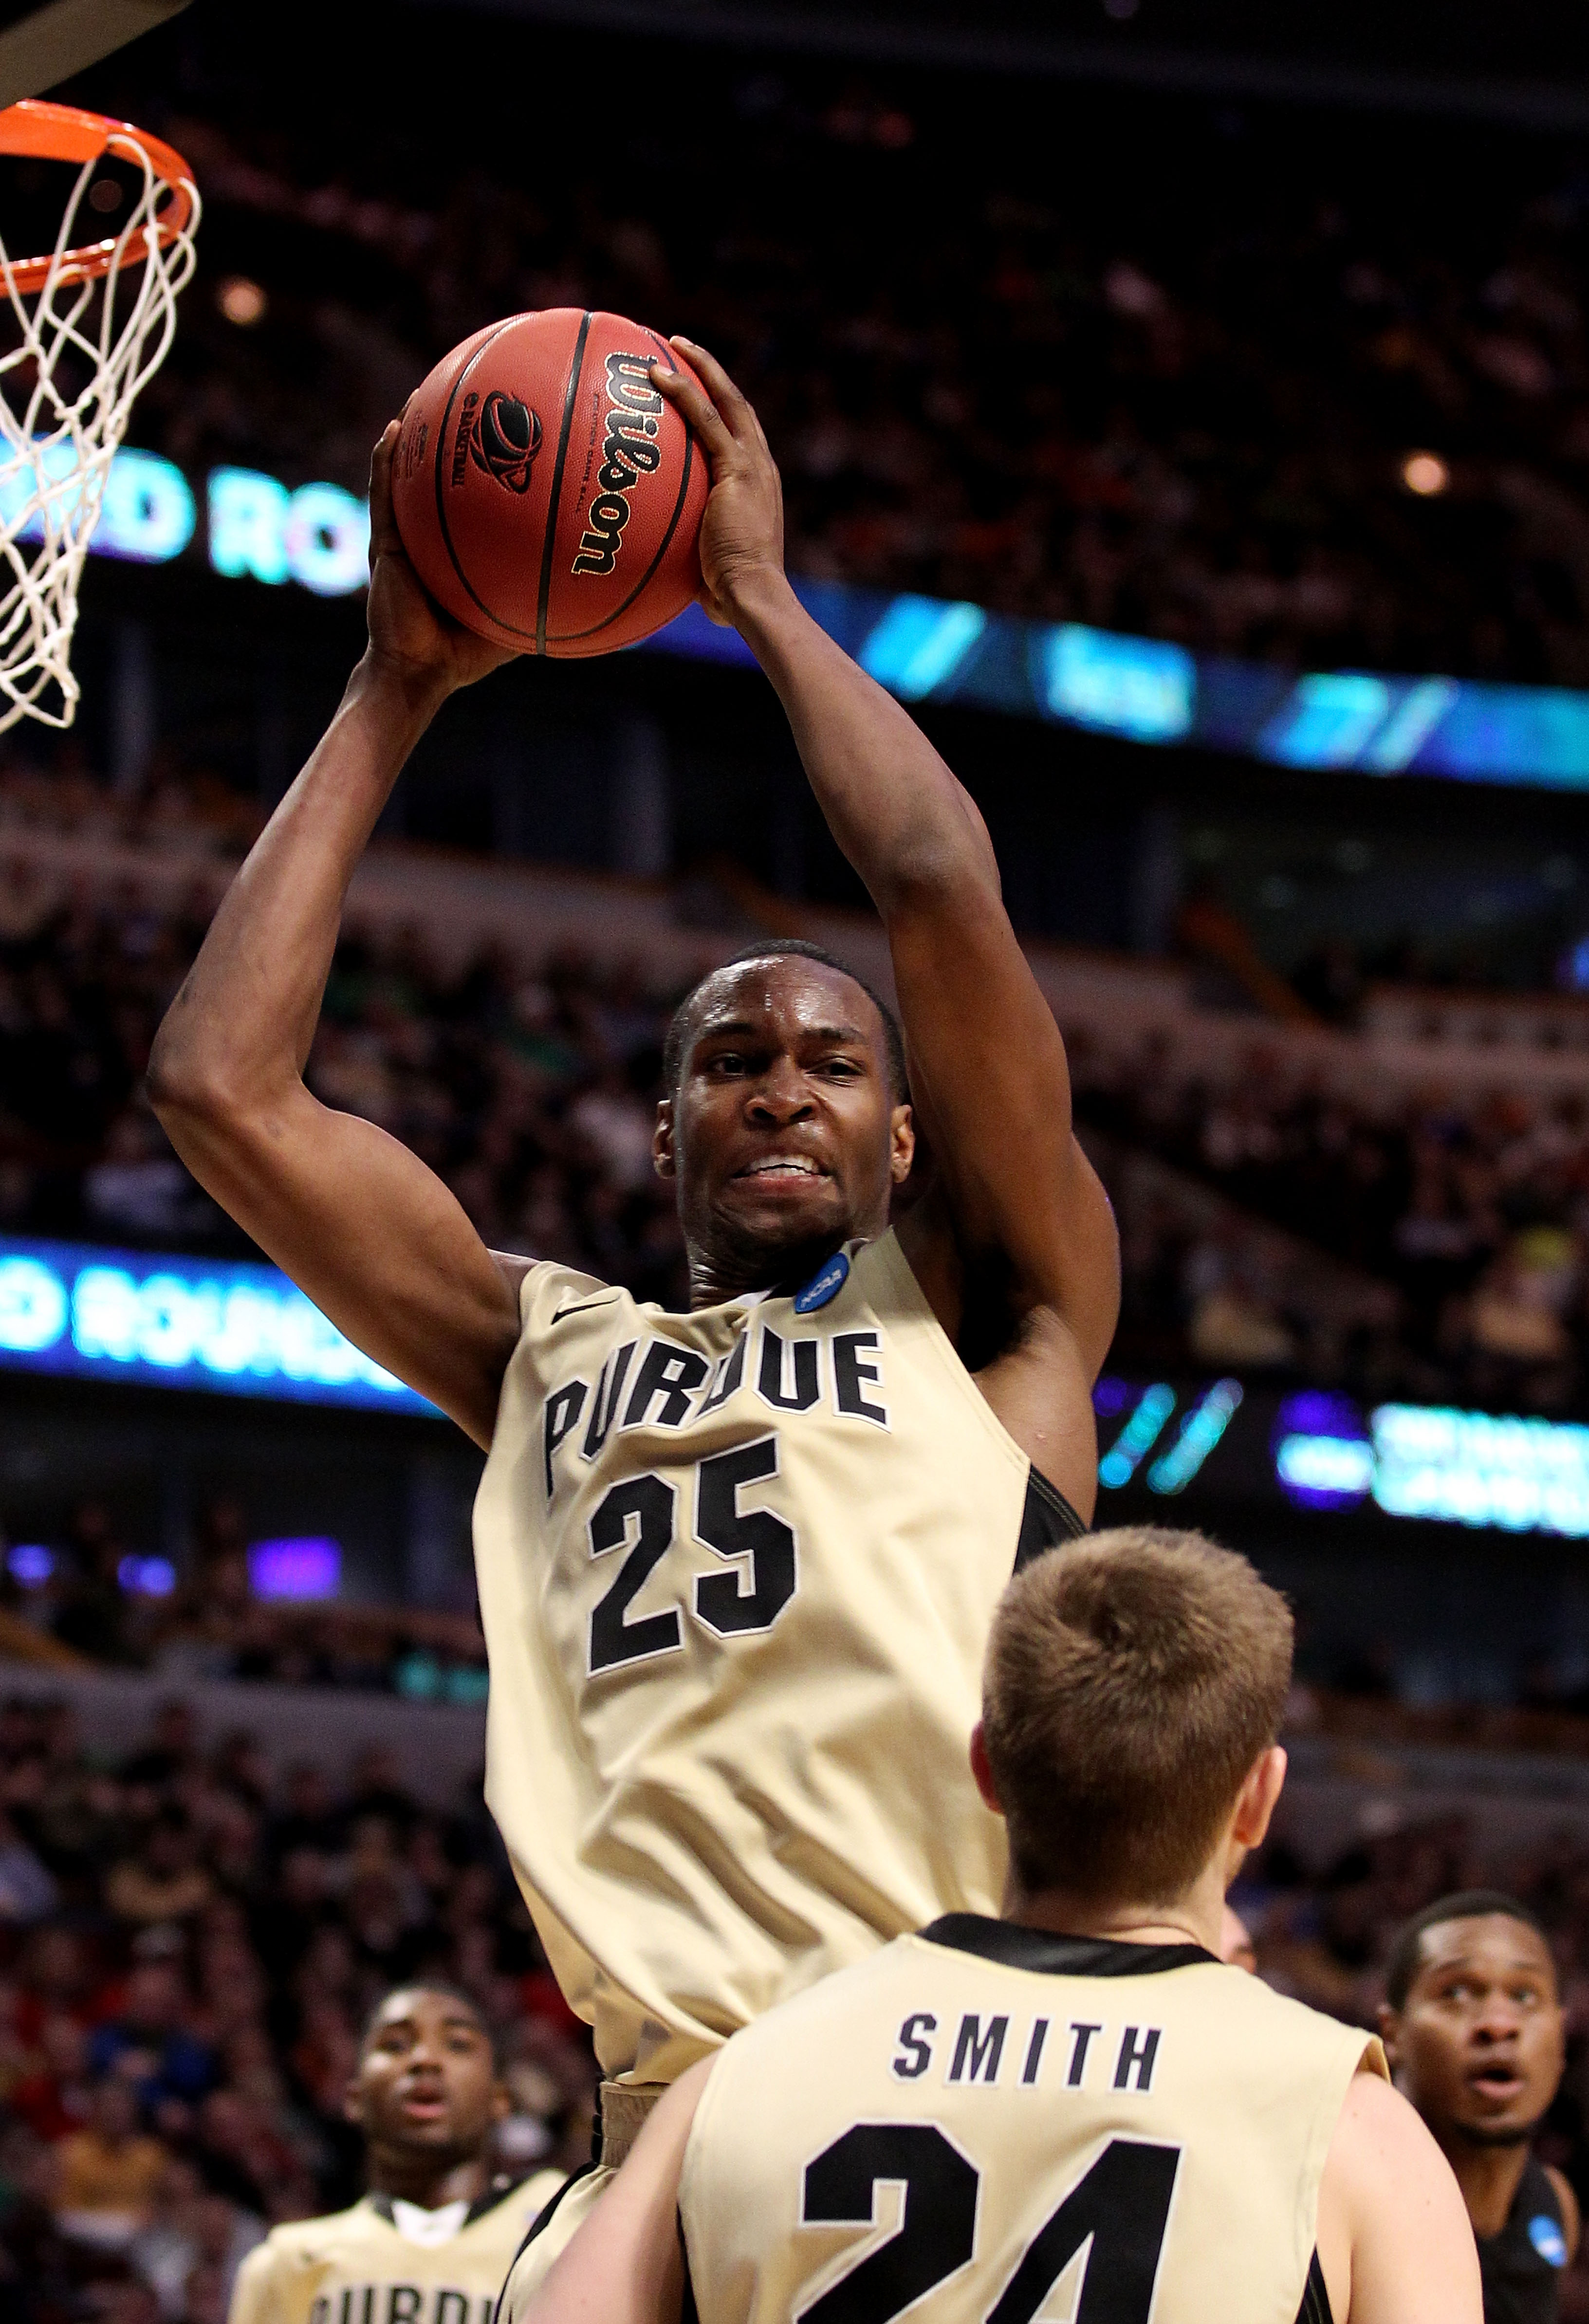 CHICAGO, IL - MARCH 20:  JaJuan Johnson #25 of the Purdue Boilermakers rebounds against the Virginia Commonwealth Rams in the second half during the third round of the 2011 NCAA men's basketball tournament at the United Center on March 20, 2011 in Chicago